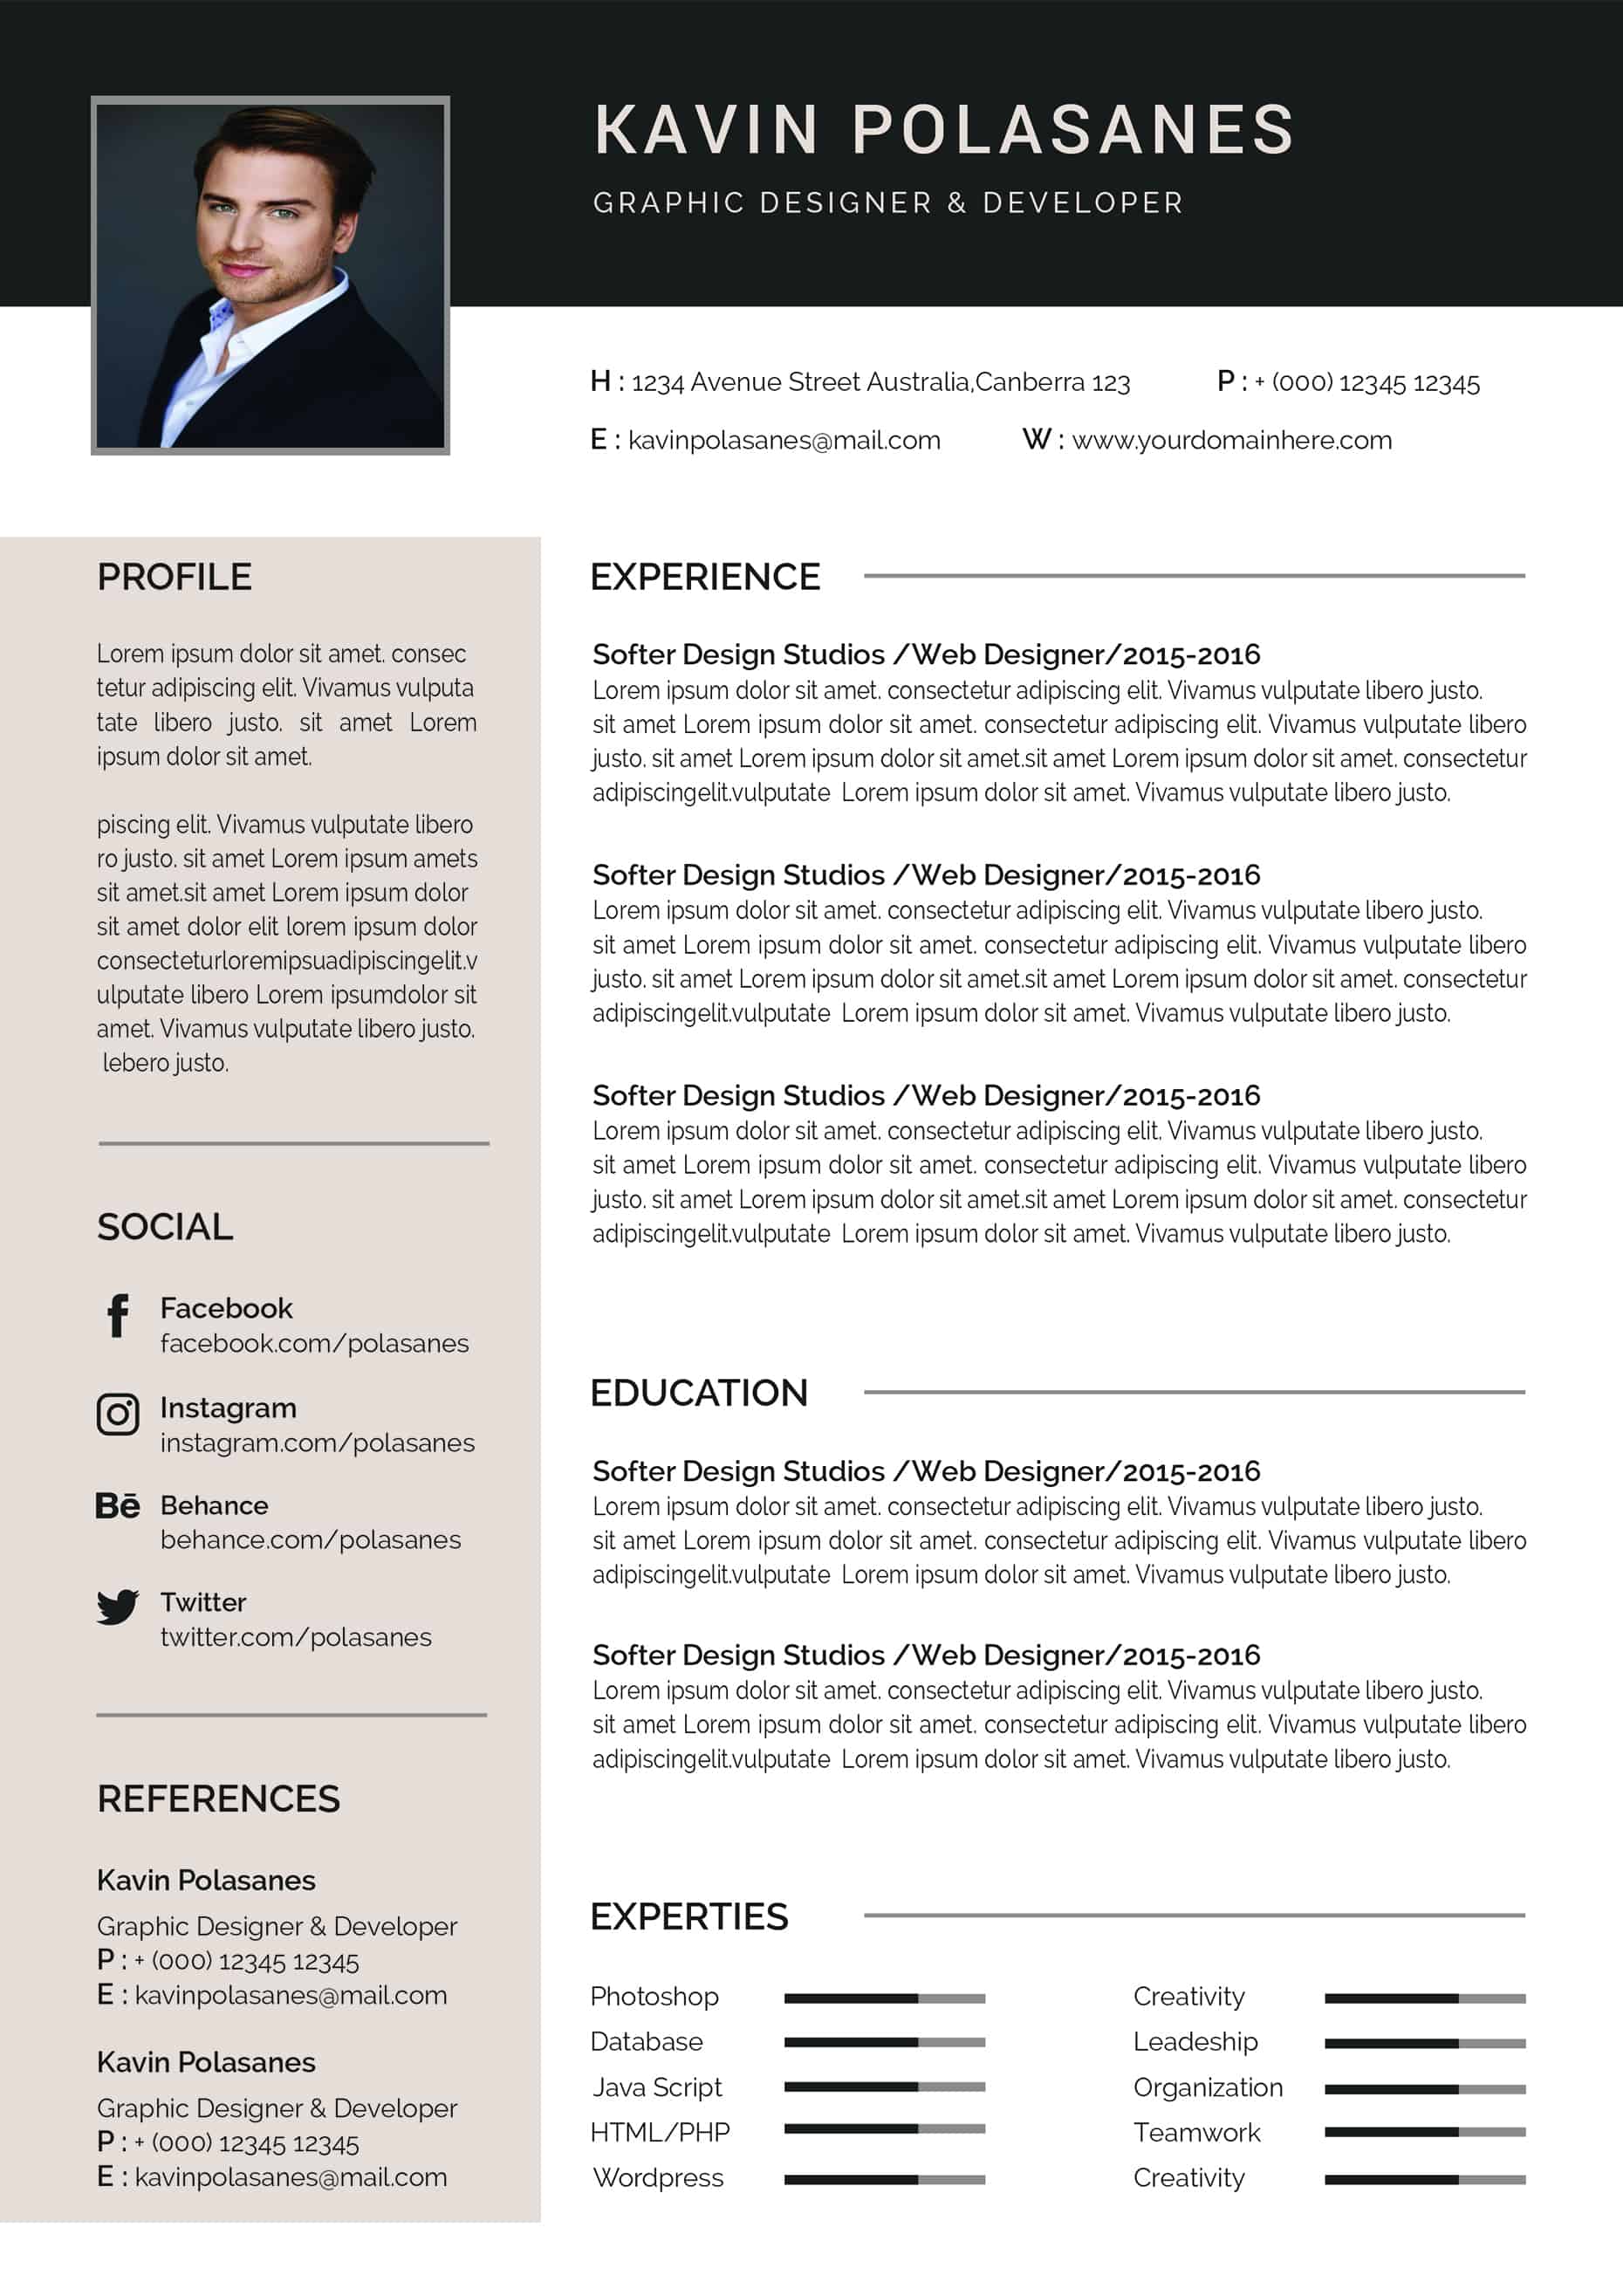 Microsoft word templates for resume - bermomiss